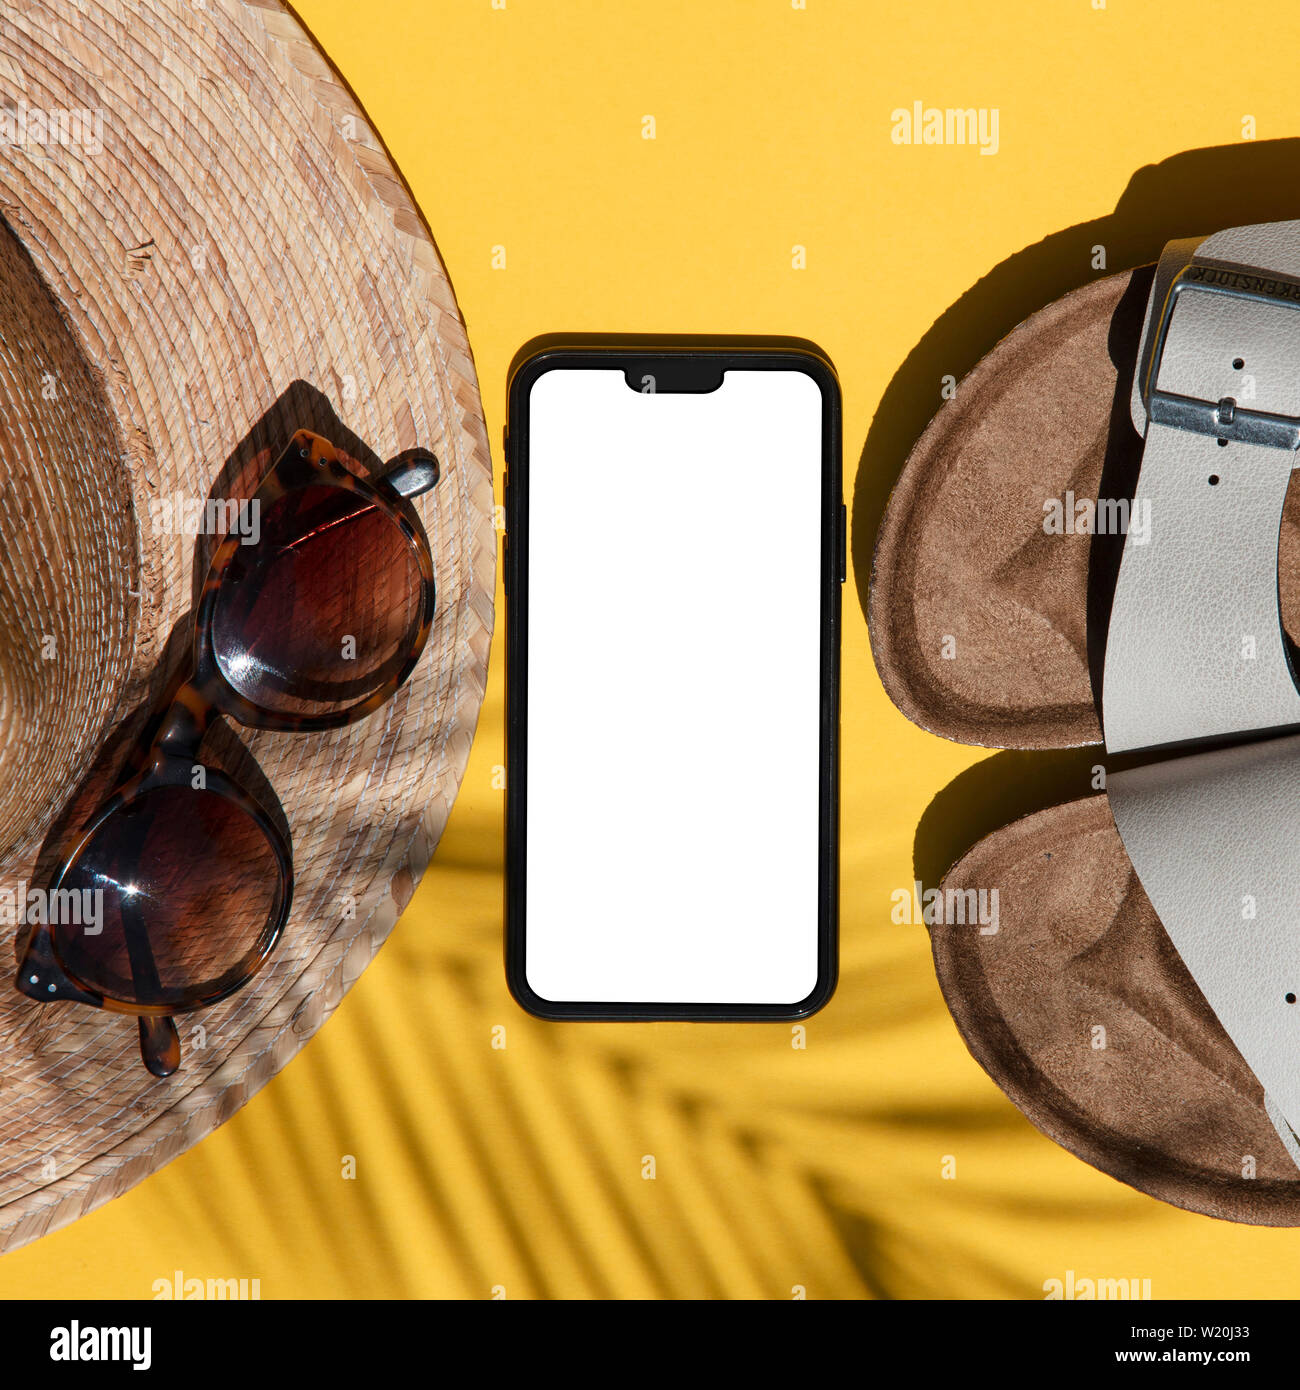 Summertime composition. Blank smartphone with summer accessories and palm shadow Stock Photo